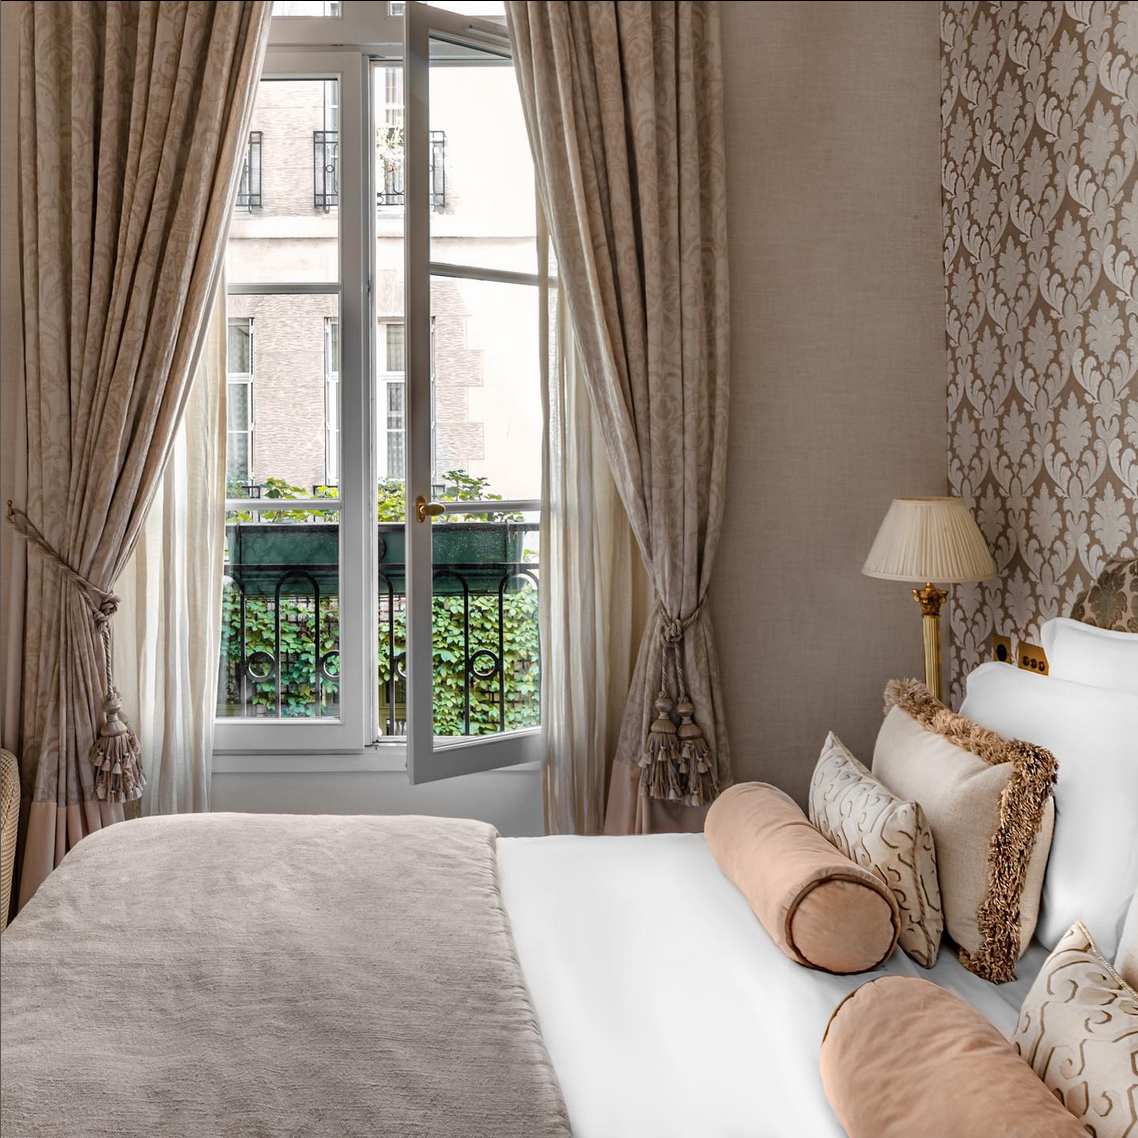 4 star hotels in paris with room service 